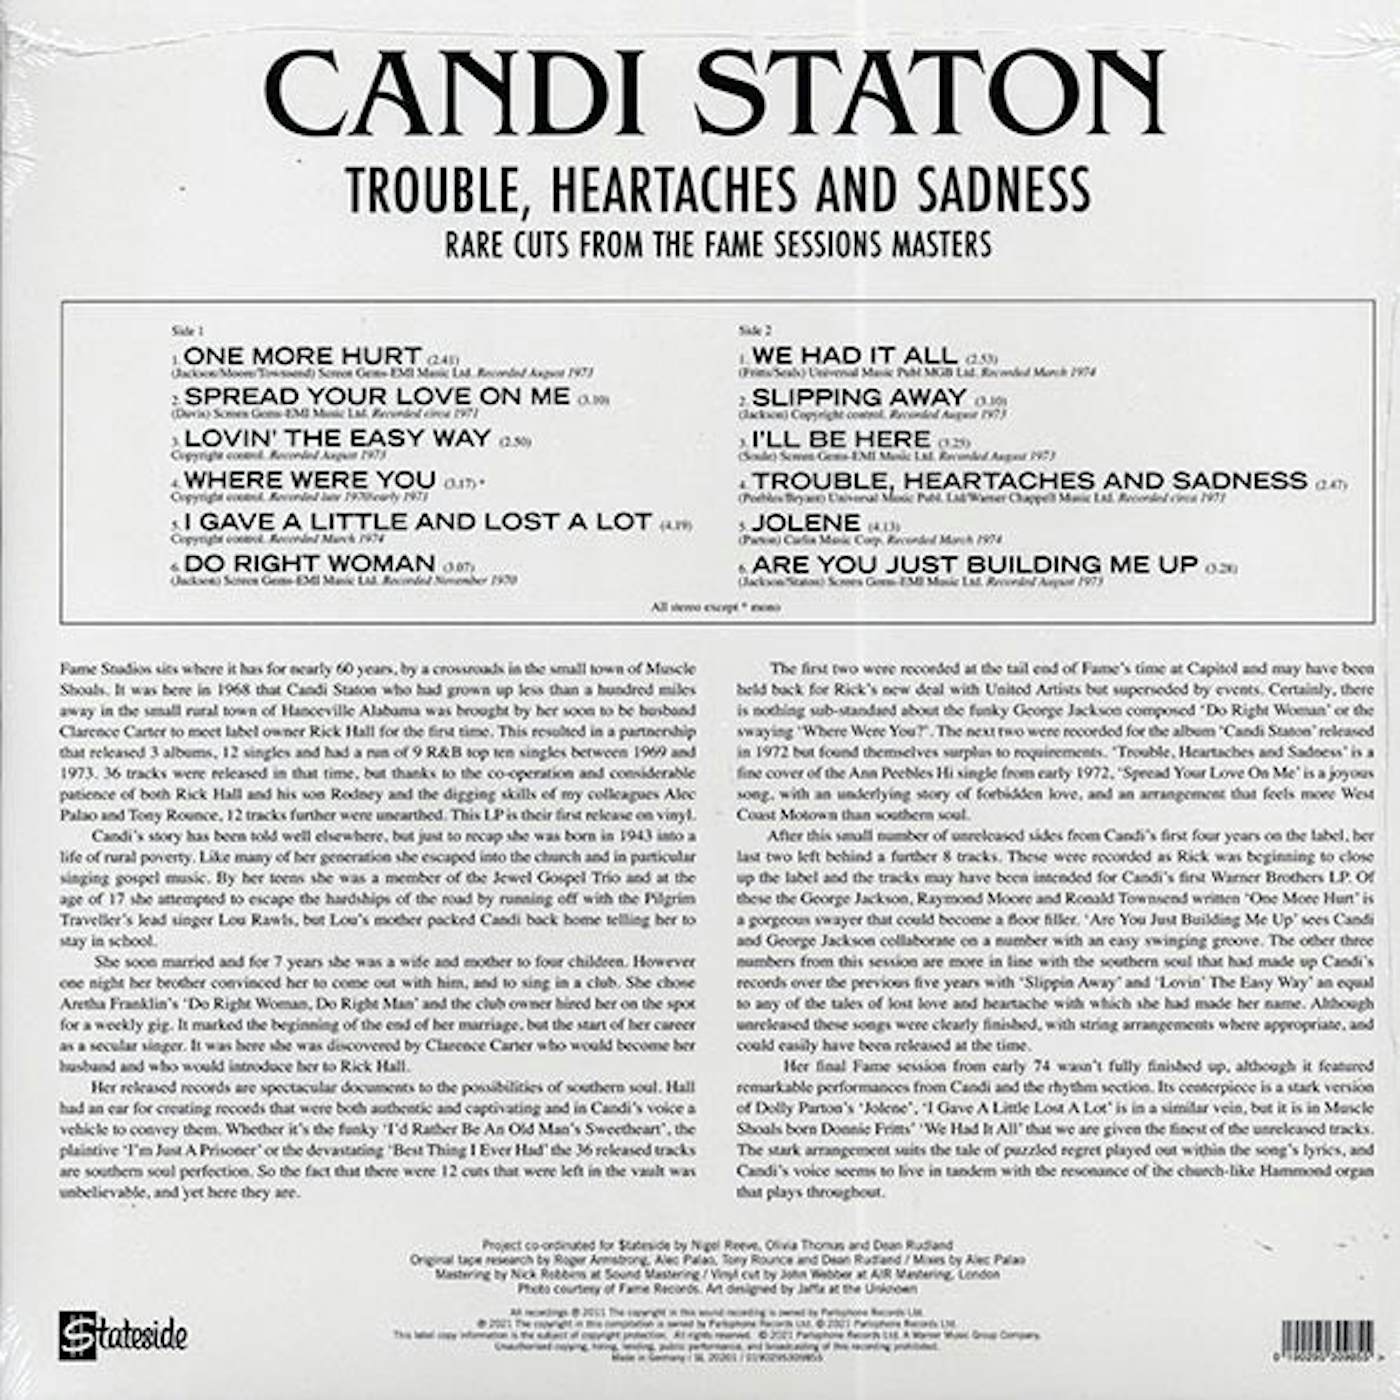 Candi Staton  LP -  Trouble, Heartaches And Sadess: Rare Cuts From The Fame Sessions Masters (RSD 2021) (ltd. ed.) (Vinyl)